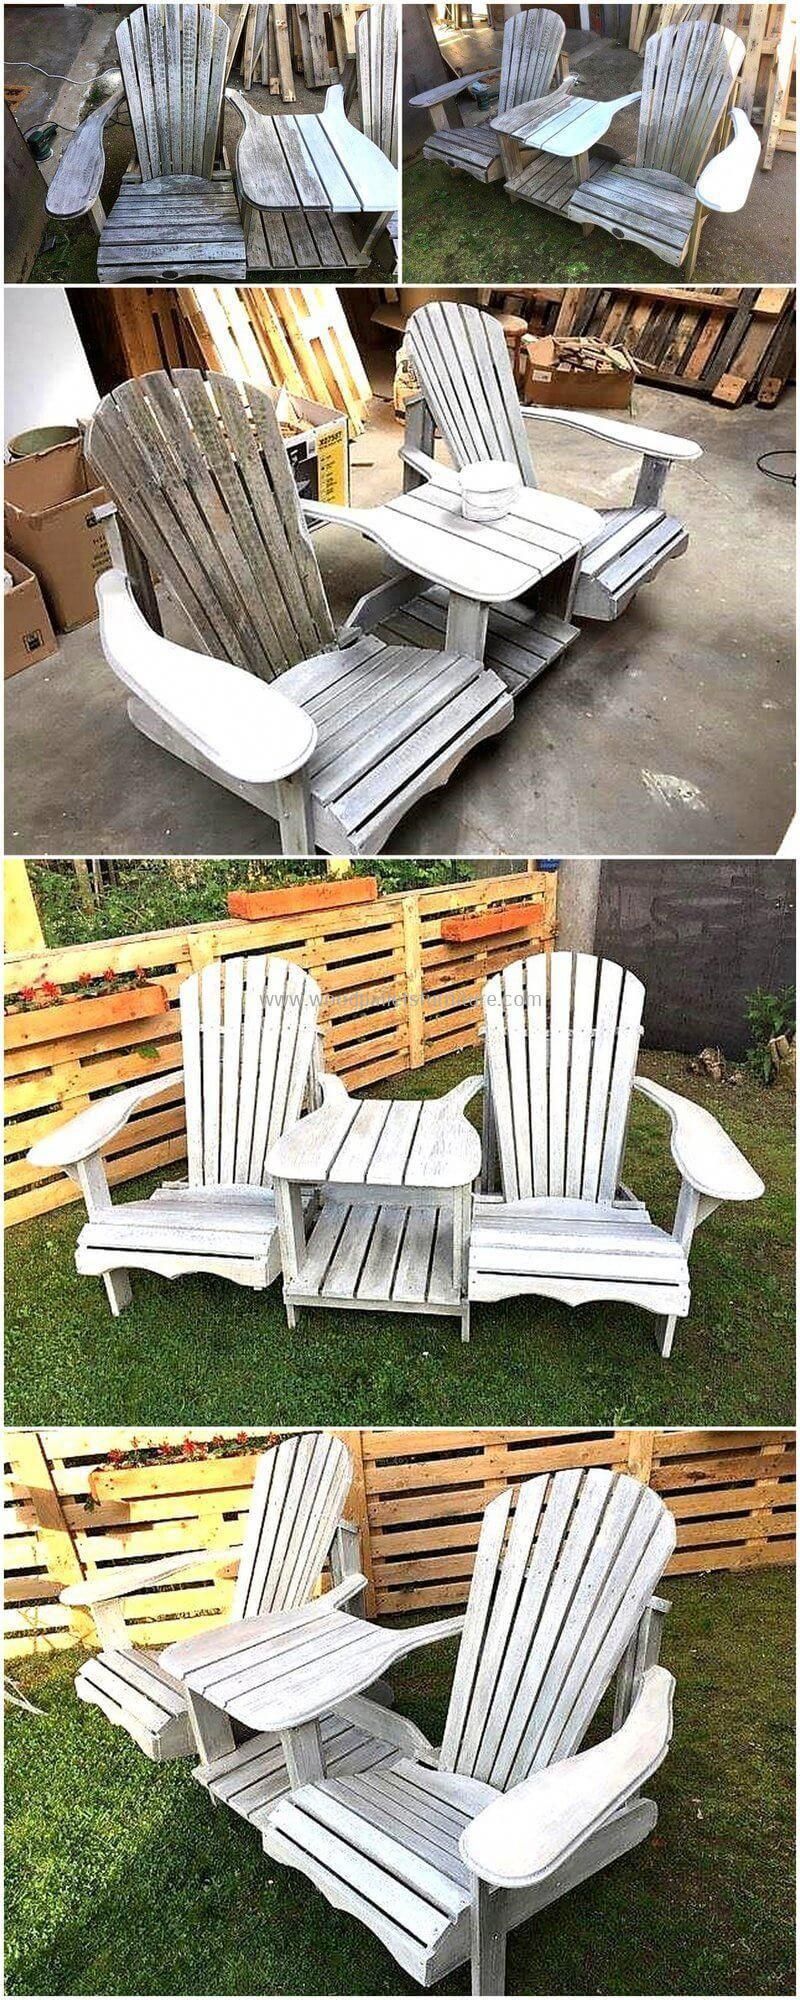 For the couple, who loves to sit in the garden and spend time with each other; we have an idea for creating reclaimed wood pallet Adirondack garden seats with attached table which is easy to copy. -   25 garden seating pallets
 ideas